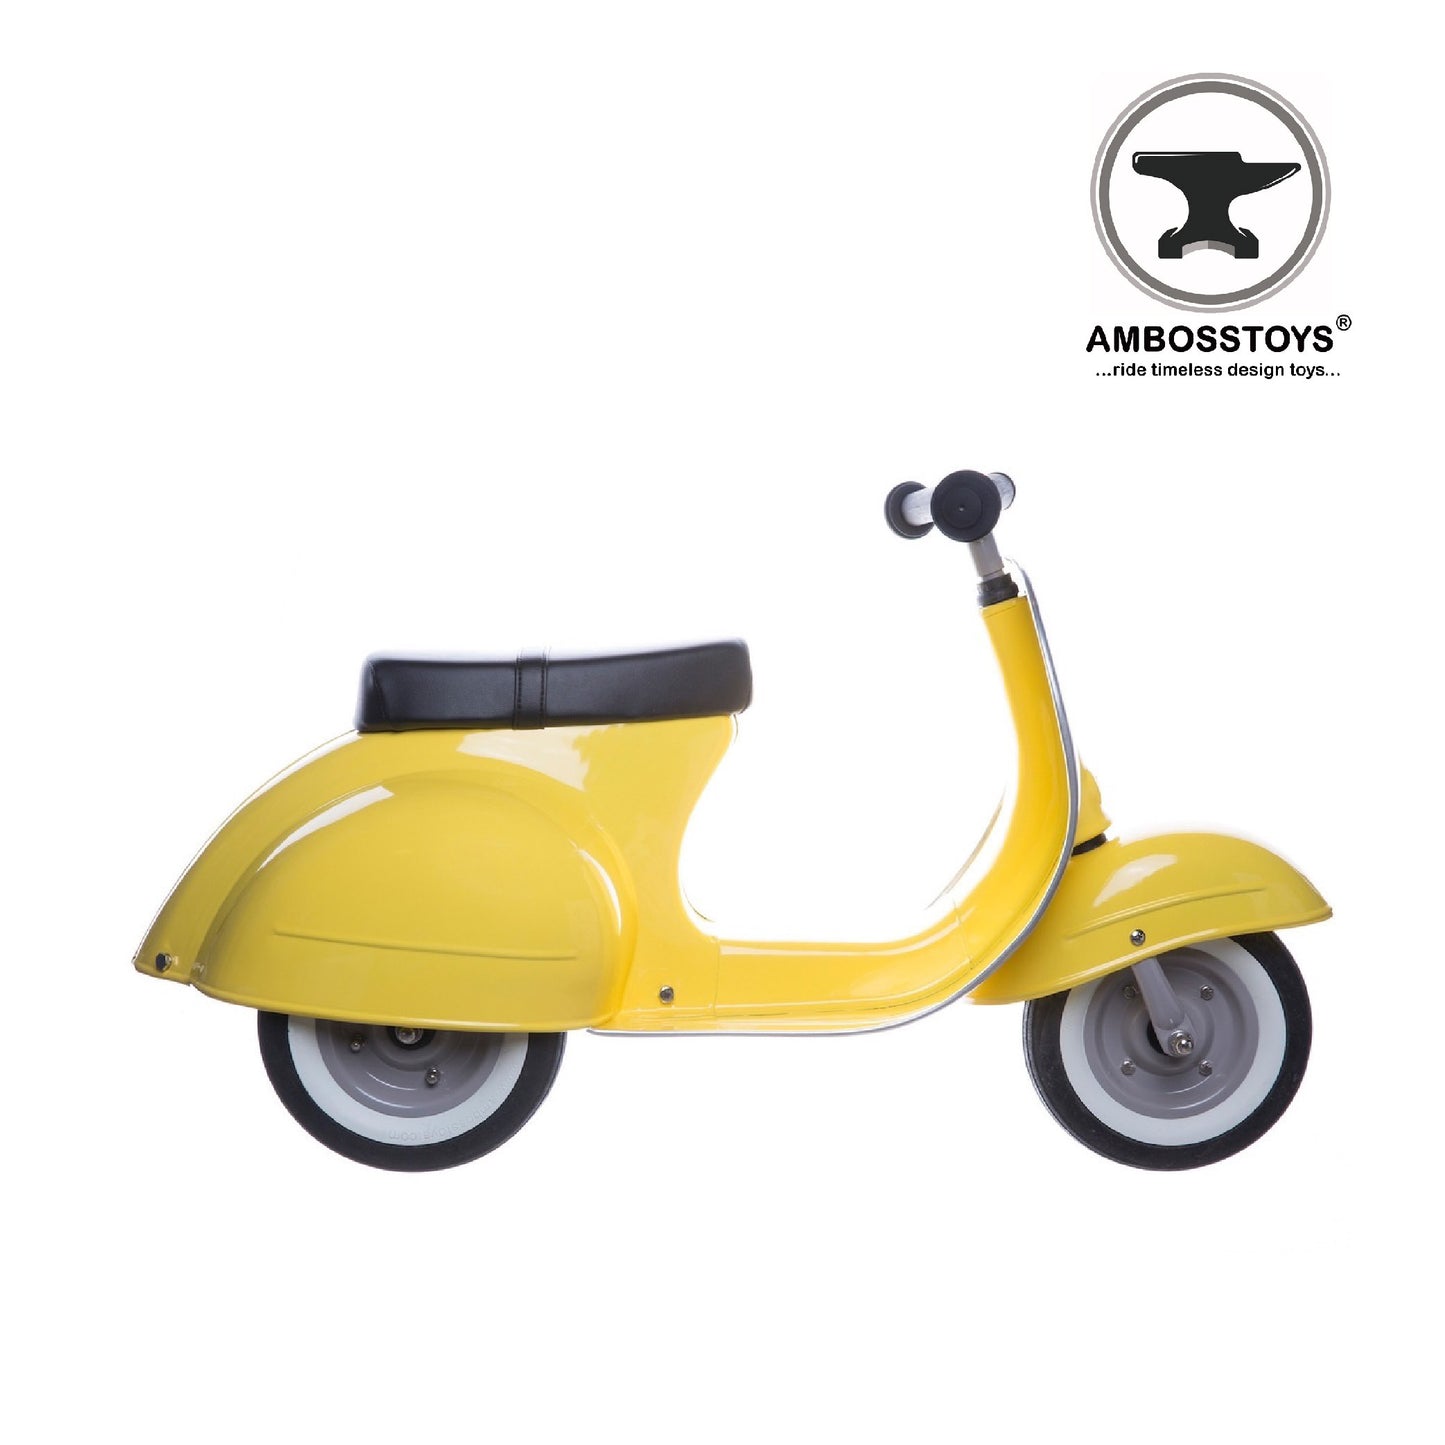 [Ambosstoys] PRIMO classic retro style scooter - 5 colors available